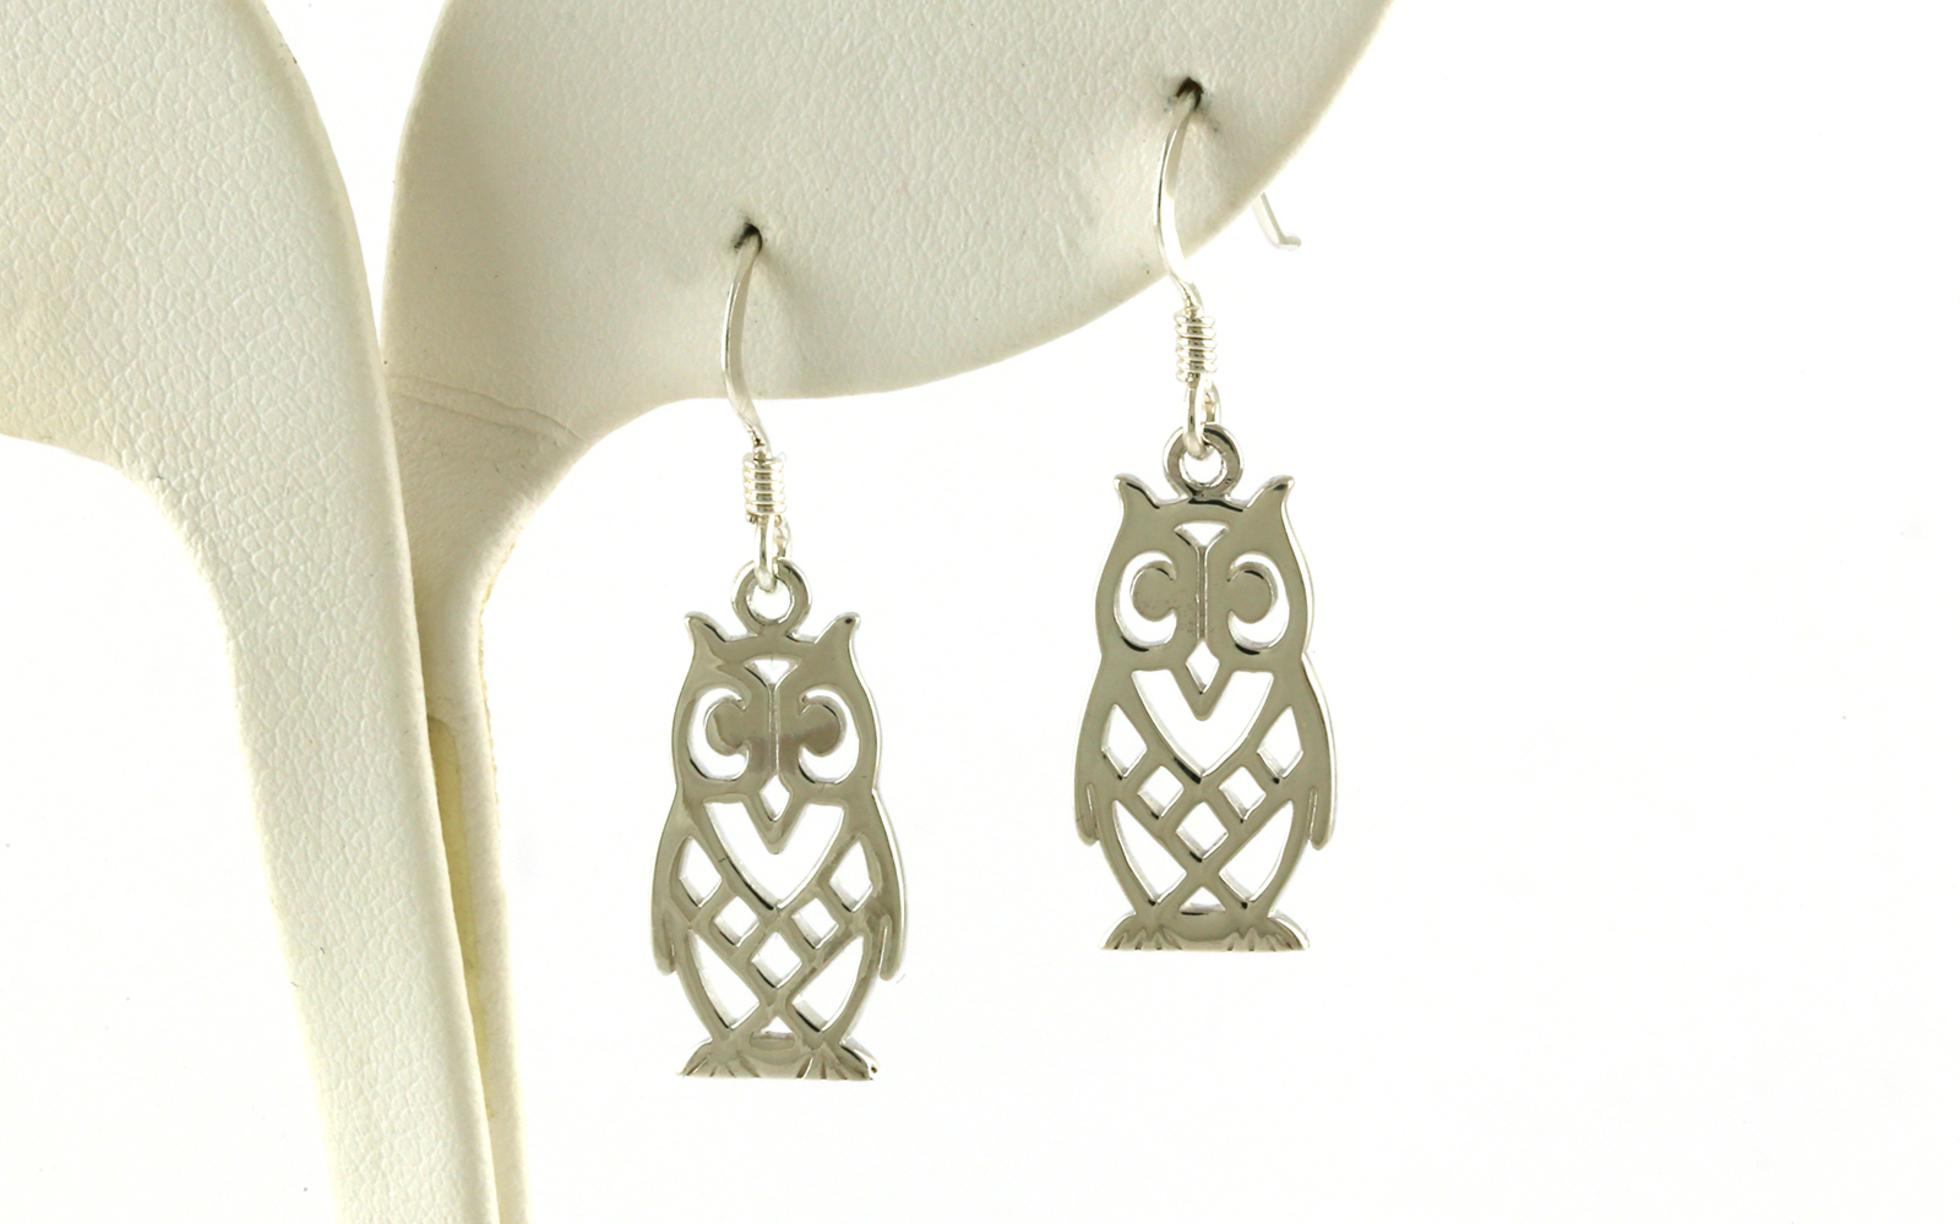 Owls Dangle Earrings with French Hooks in Sterling Silver